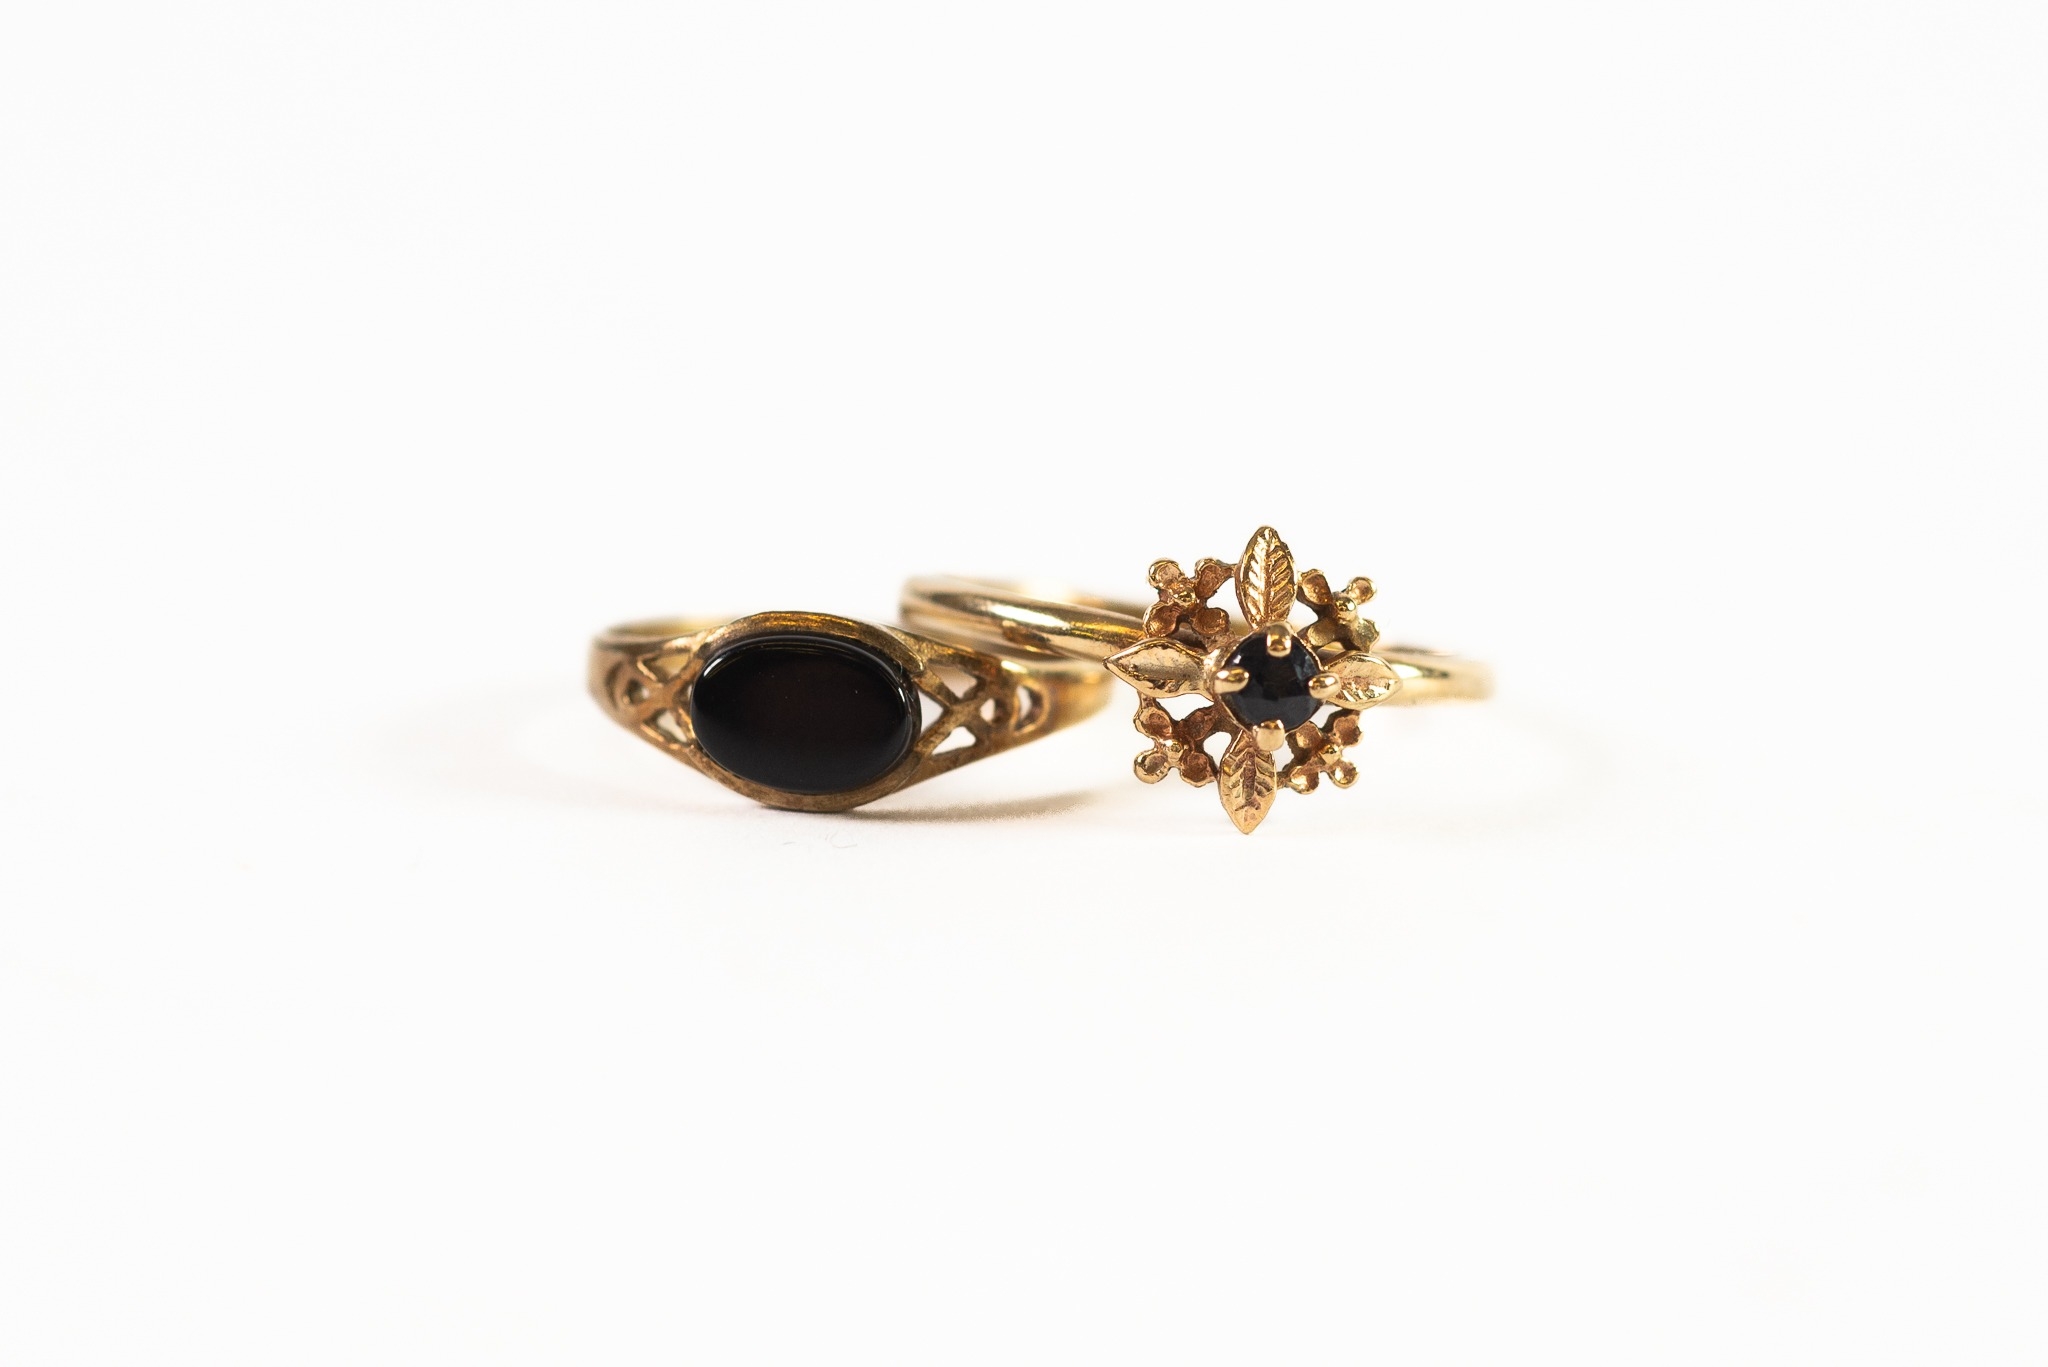 9ct GOLD RING, the square top formed from four flowers with foliage, set with a tiny ruby and a